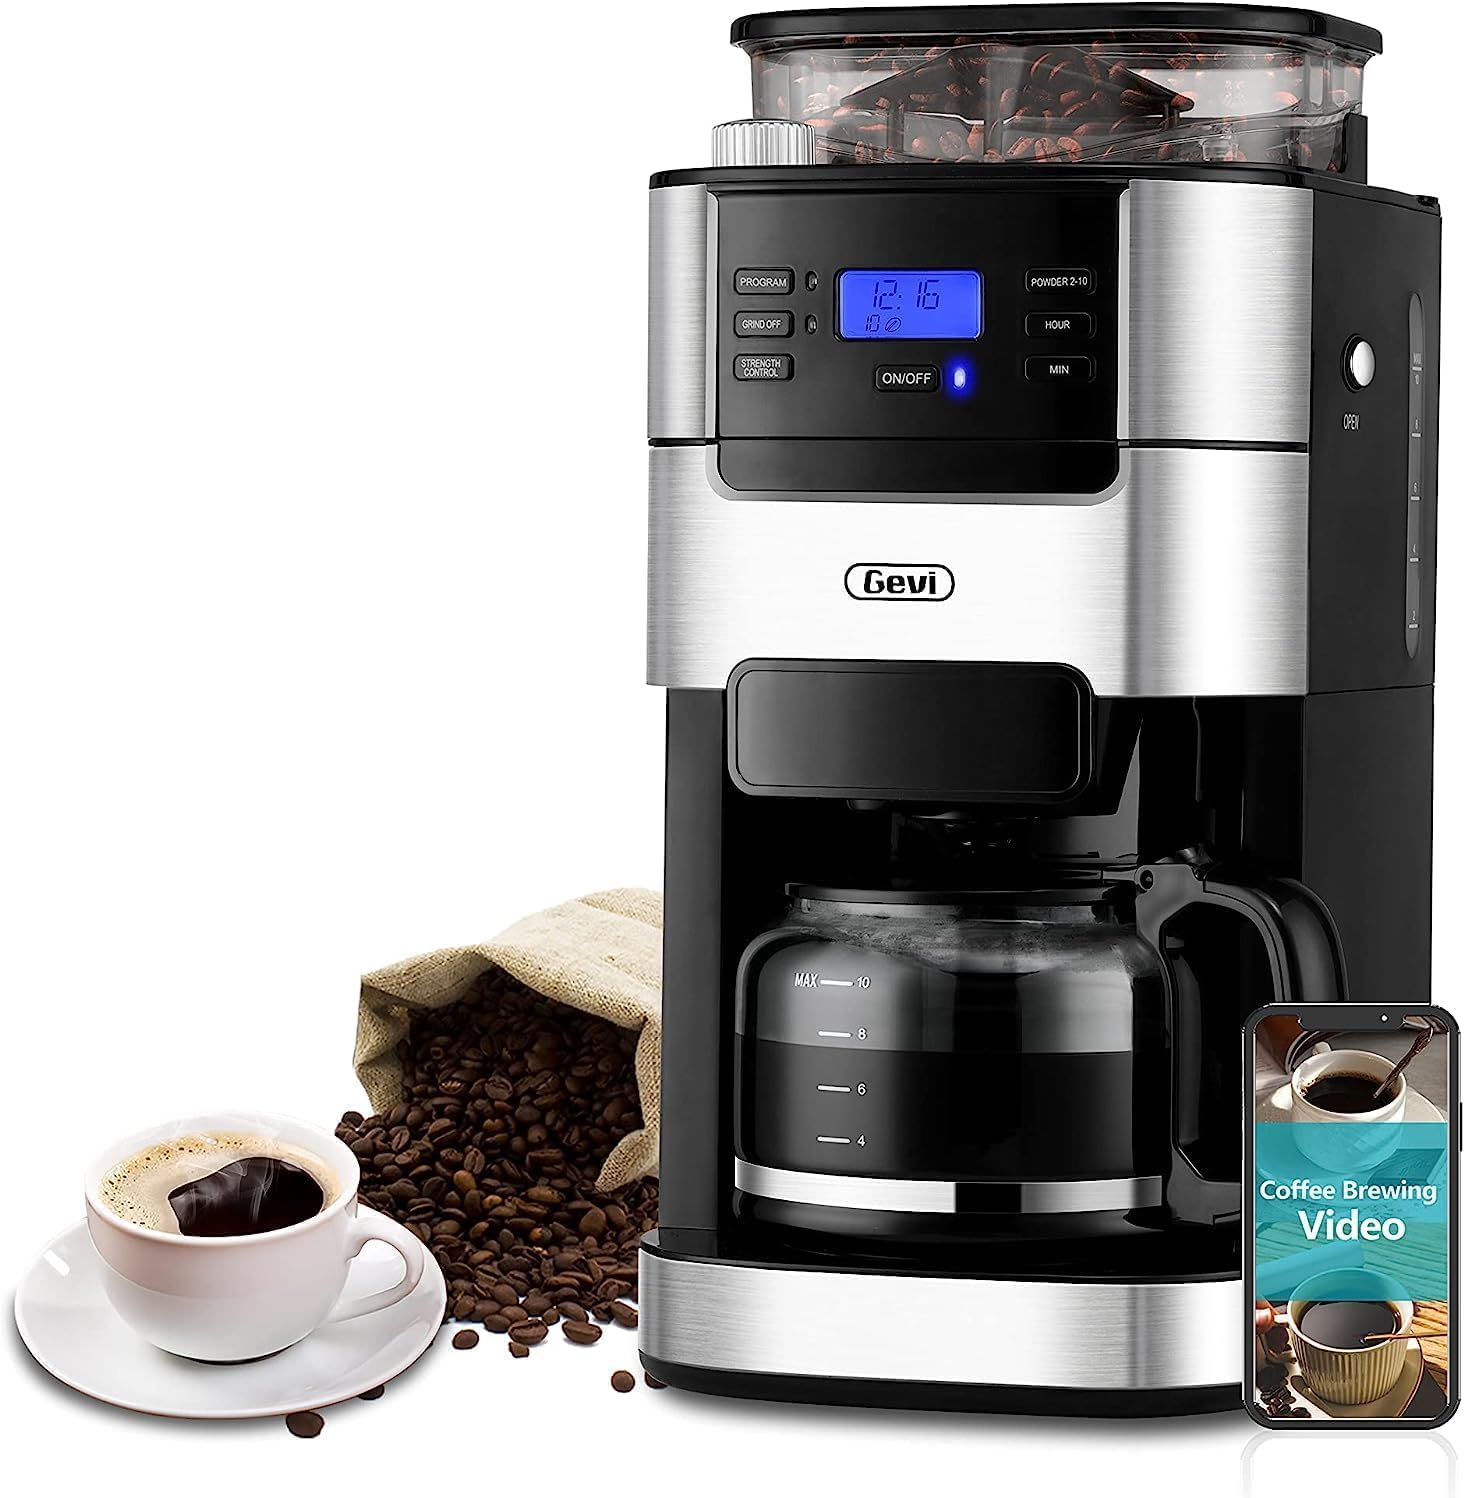 10-Cup Programmable Grind Brew Coffee Maker with Built-In Burr Grinder, Large 1.5L Water Tank, Keep Warm Plate